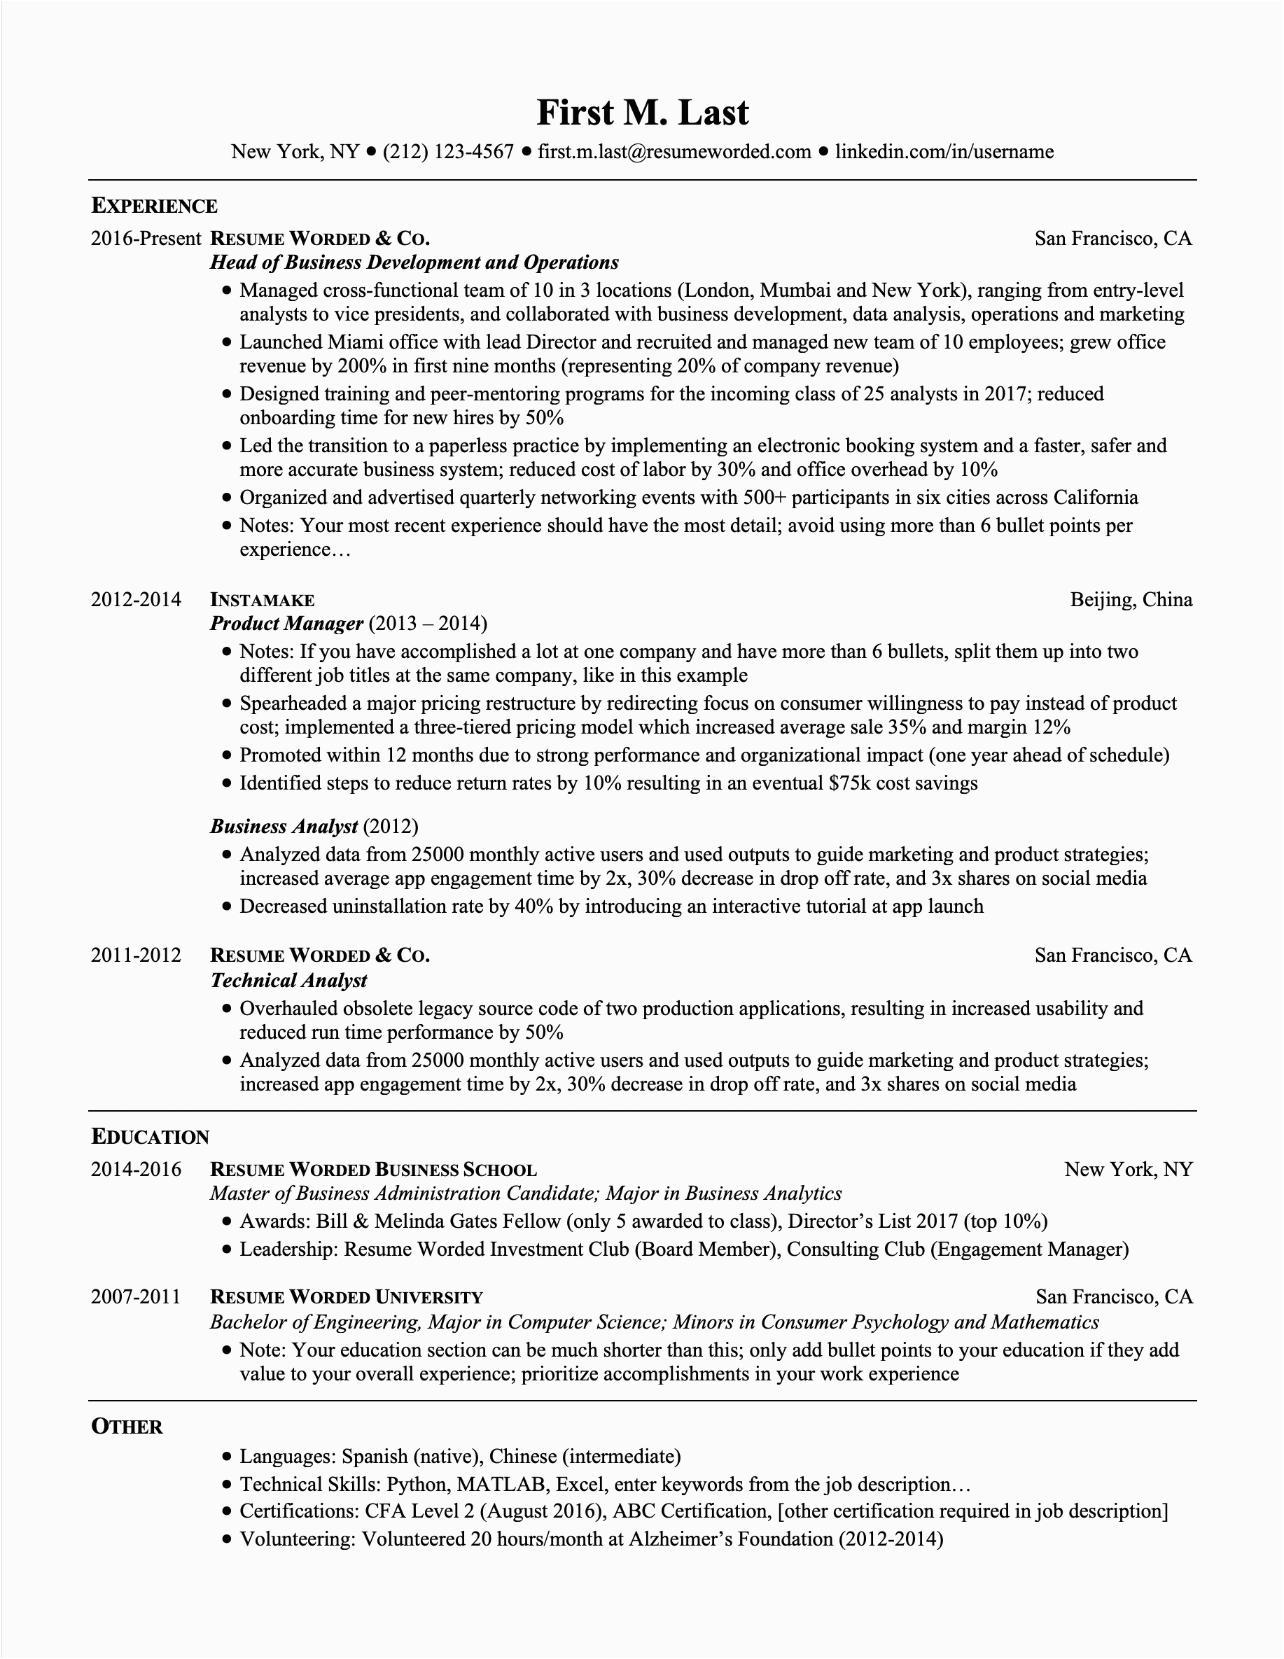 Resume Template for Multiple Positions at Same Company Professional Sample Resume Multiple Positions Same Pany